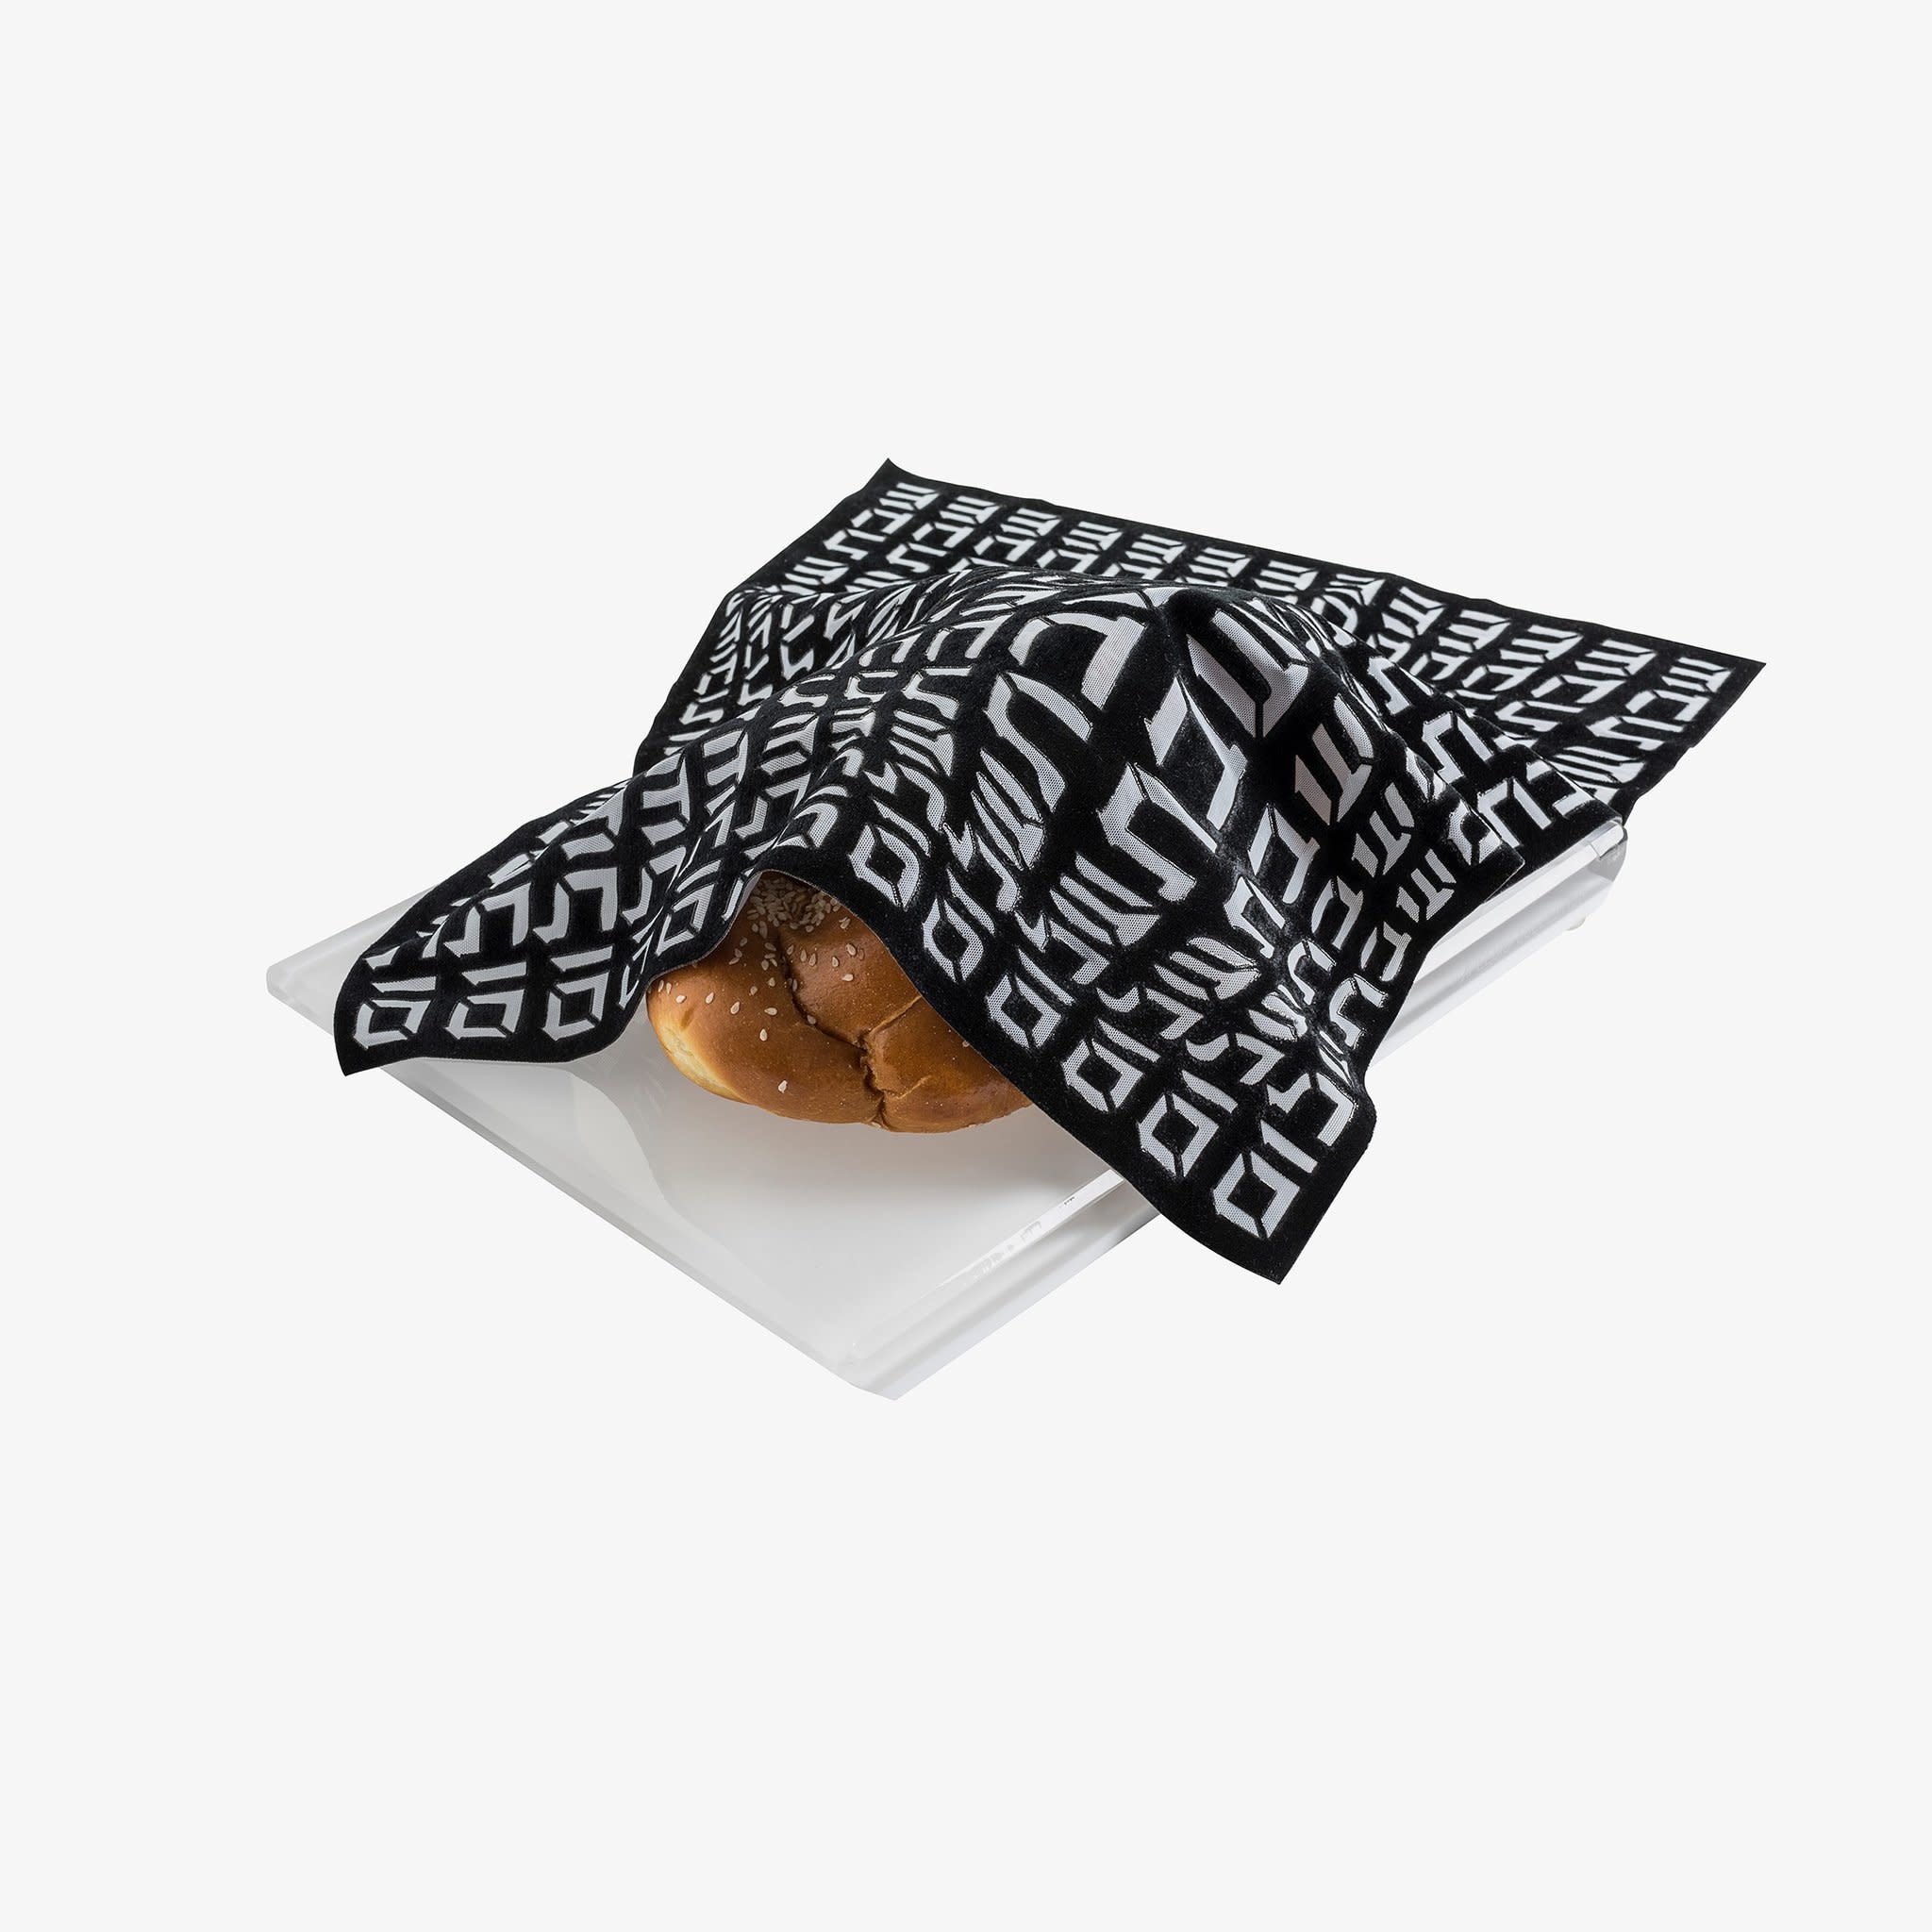 Apeloig Collection Challah Cover Hebrew Type Black